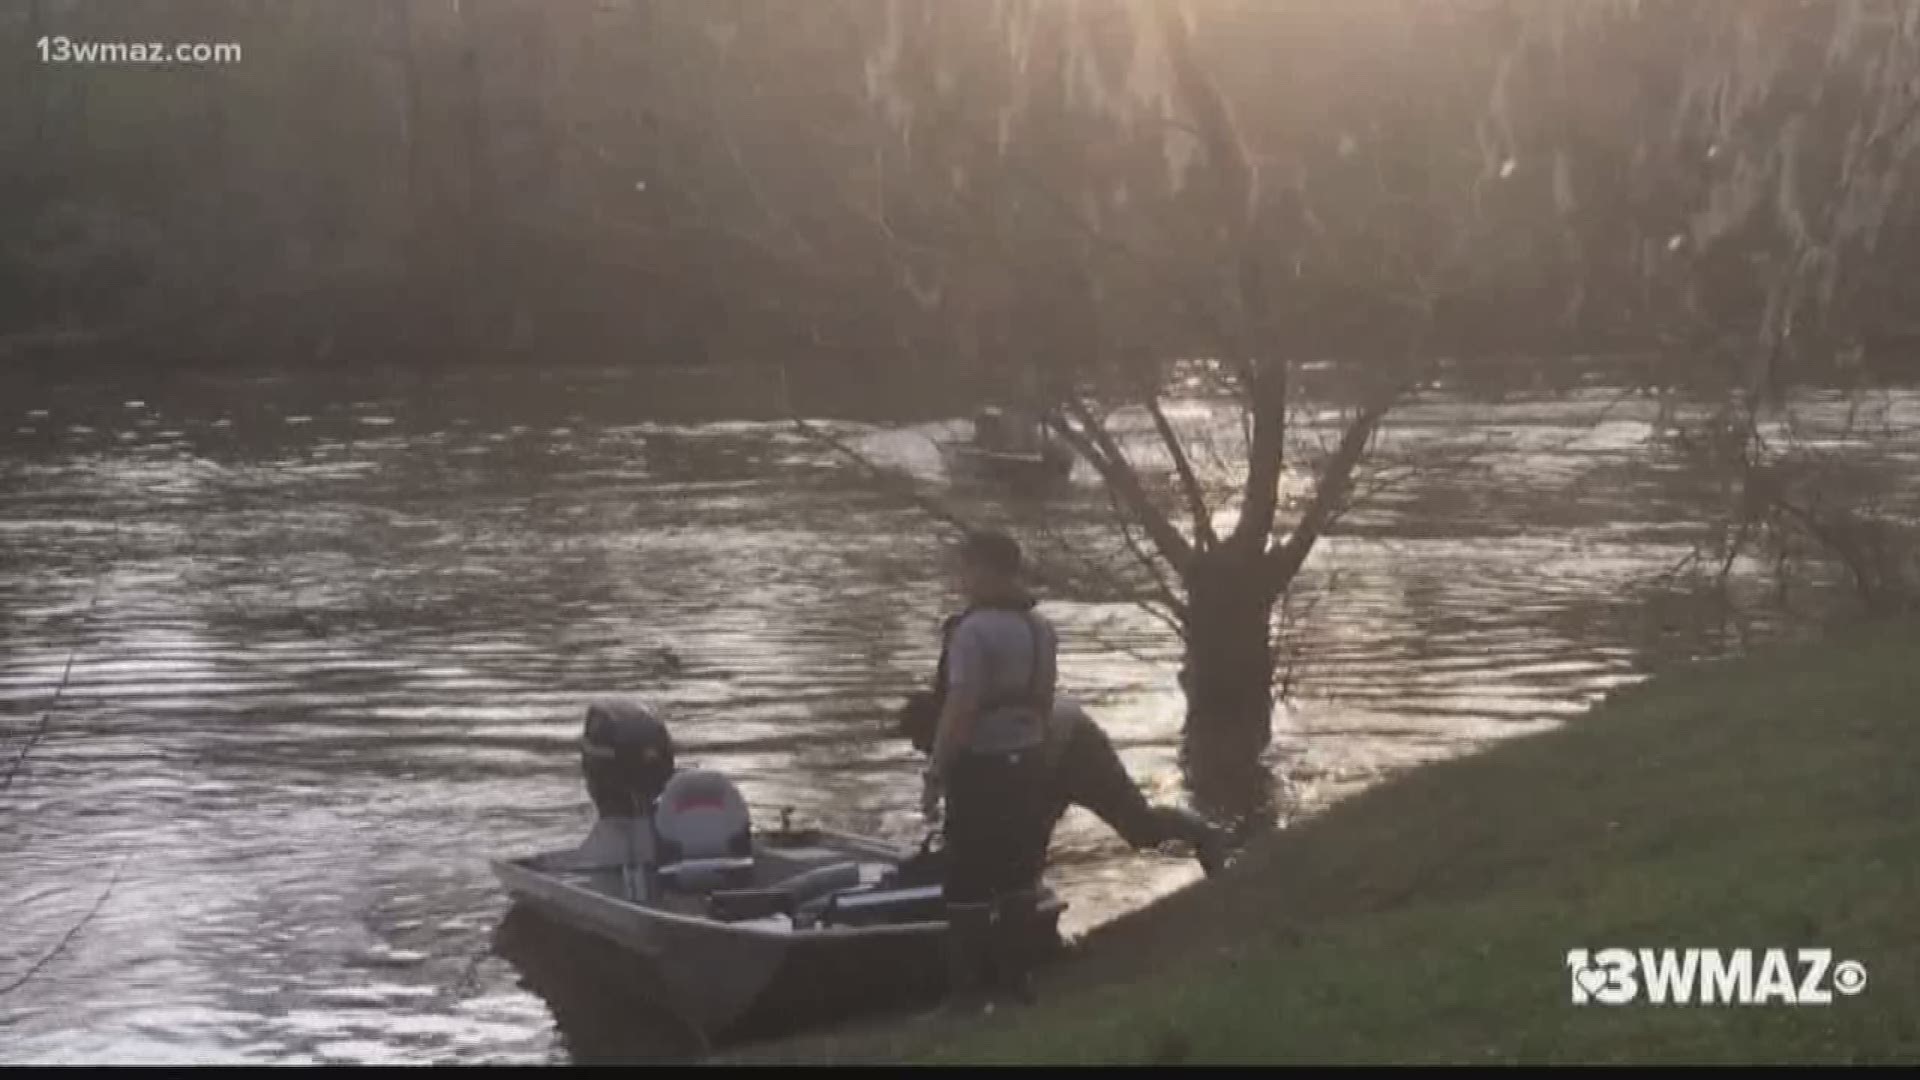 The search is on for a missing man in Bleckley County after he was reported missing along the Ocmulgee River. It's been over 24 hours since the call came in on the man's disappearance. They found his boat, but his location is still a mystery.